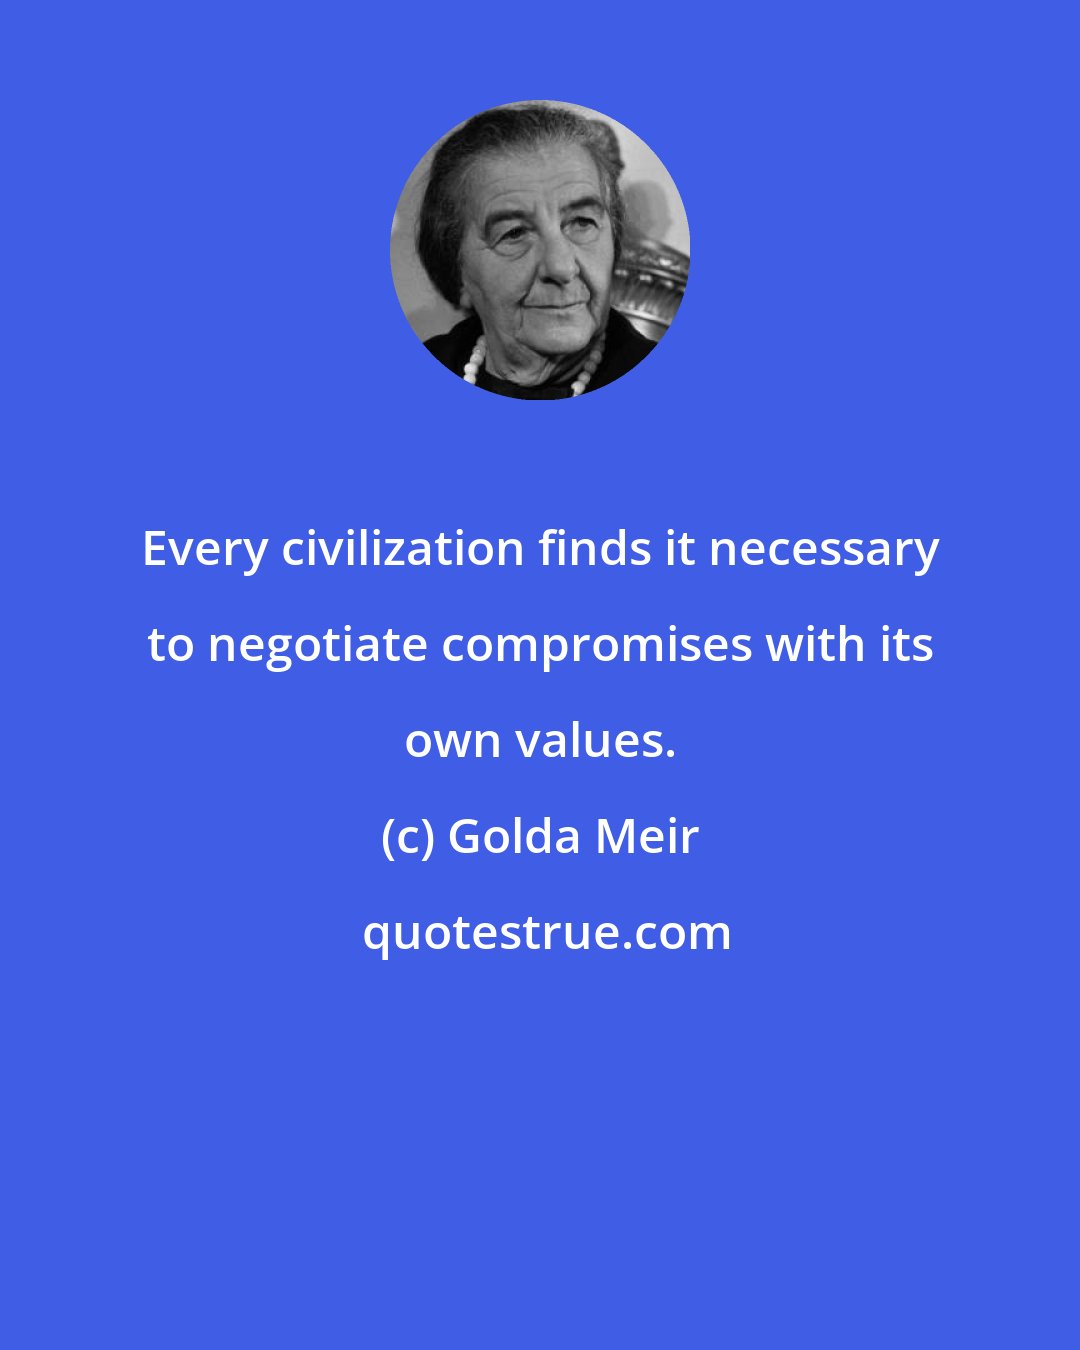 Golda Meir: Every civilization finds it necessary to negotiate compromises with its own values.